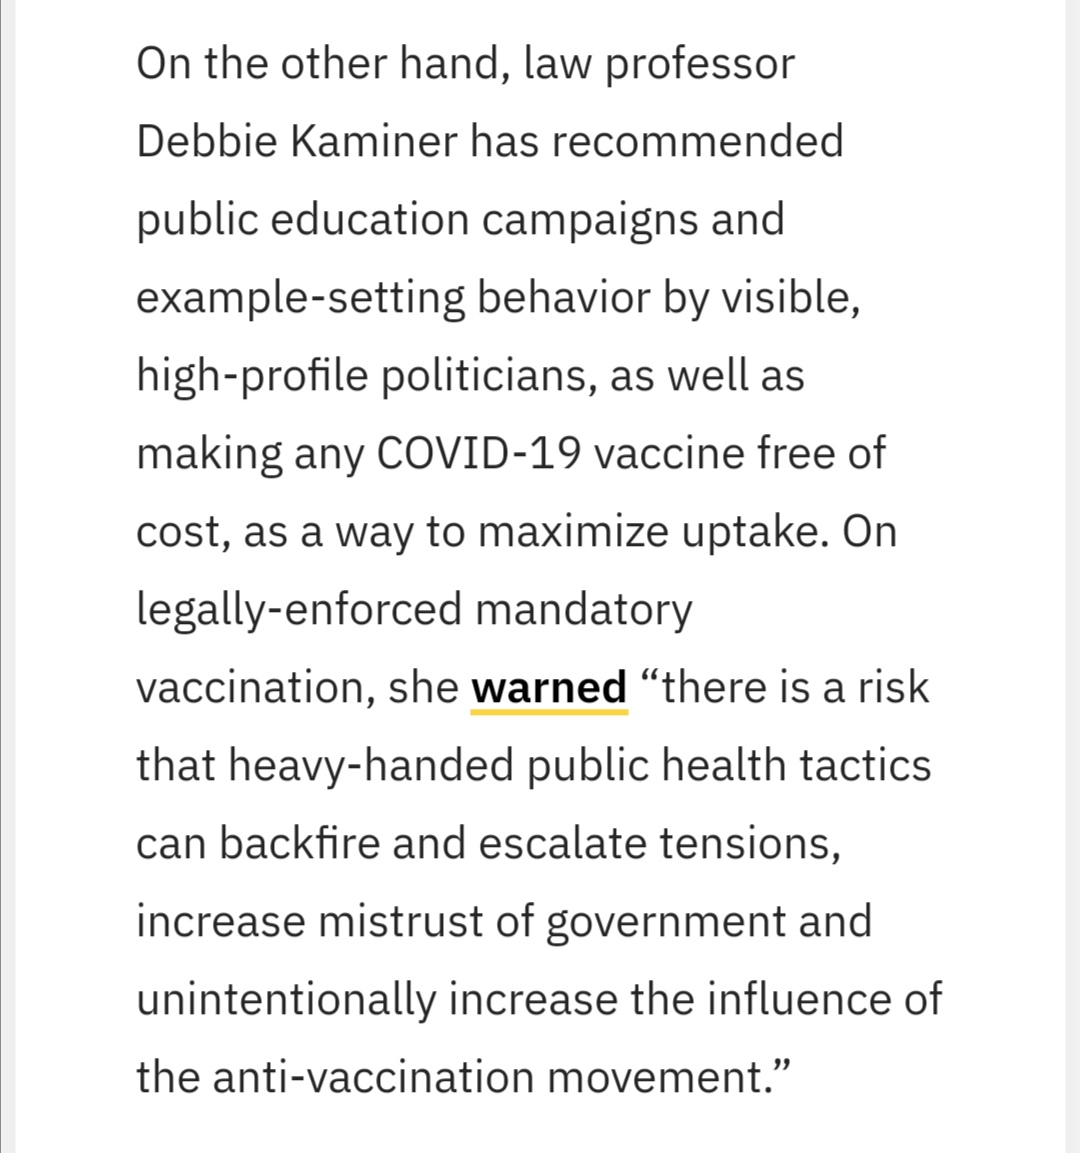 Snopes confirms that it is true that states have legal authority to jail or fine people who refuse Covid vaccine in the USA: https://www.snopes.com/fact-check/states-fine-prison-covid-vaccine/